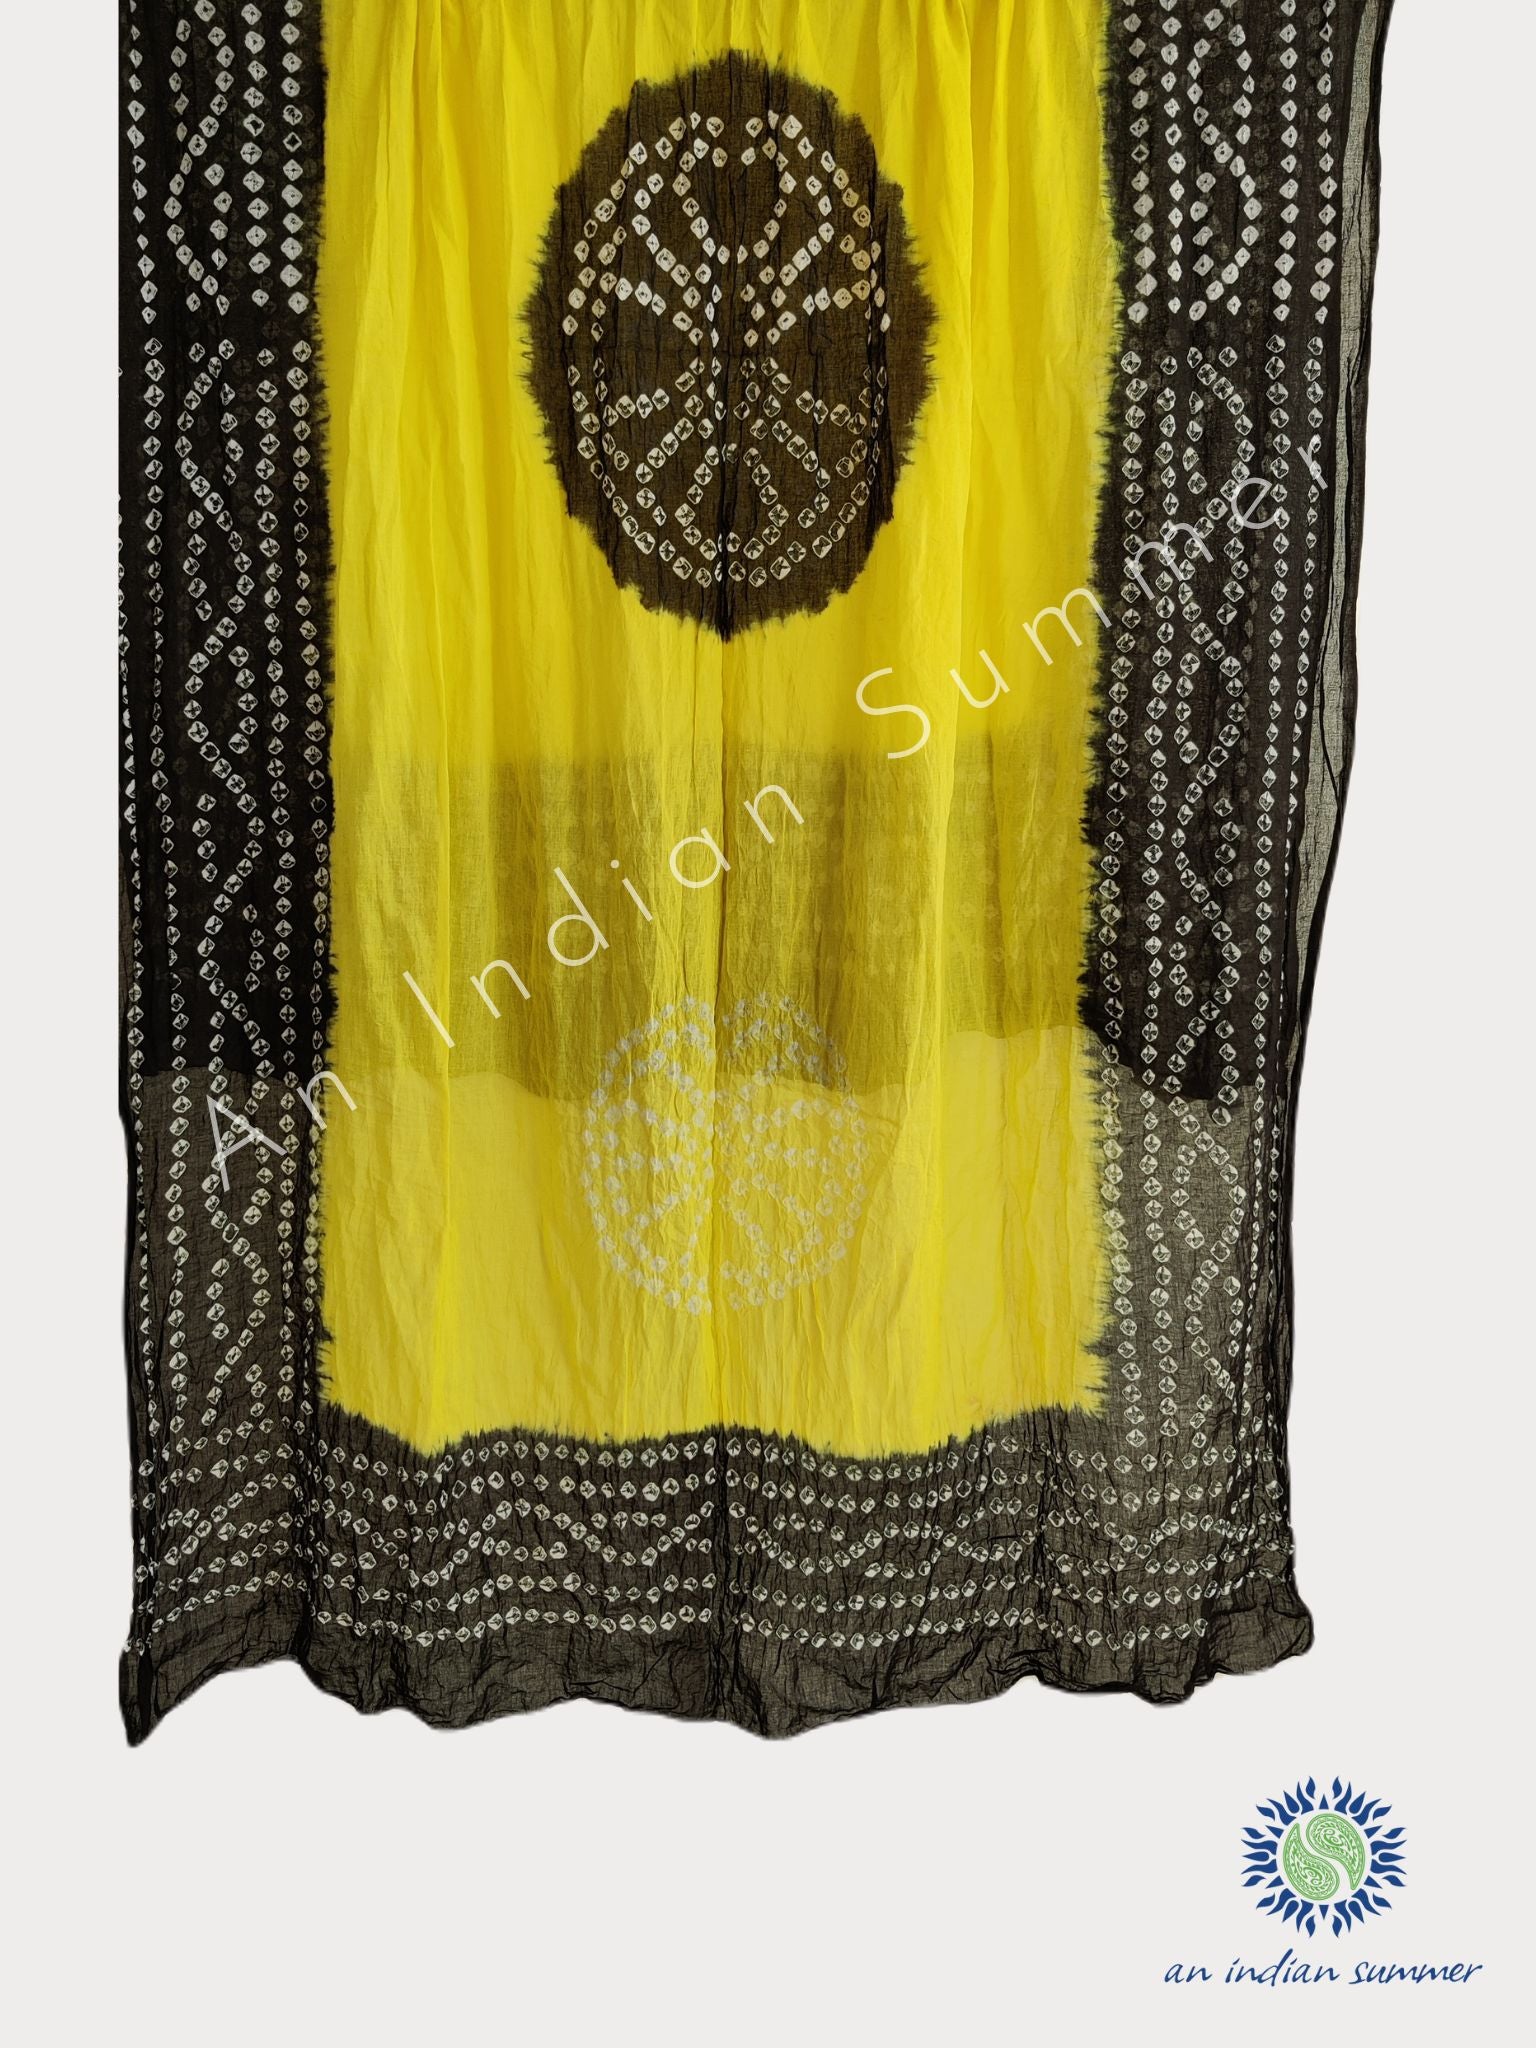 Yellow & Black | Contrast Bandhani Sarongs Pareos Shawls | Bandhej Tie Dye | Hand Tie-Dyed | Cotton Voile | An Indian Summer | Seasonless Timeless Sustainable Ethical Authentic Artisan Conscious Clothing Lifestyle Brand